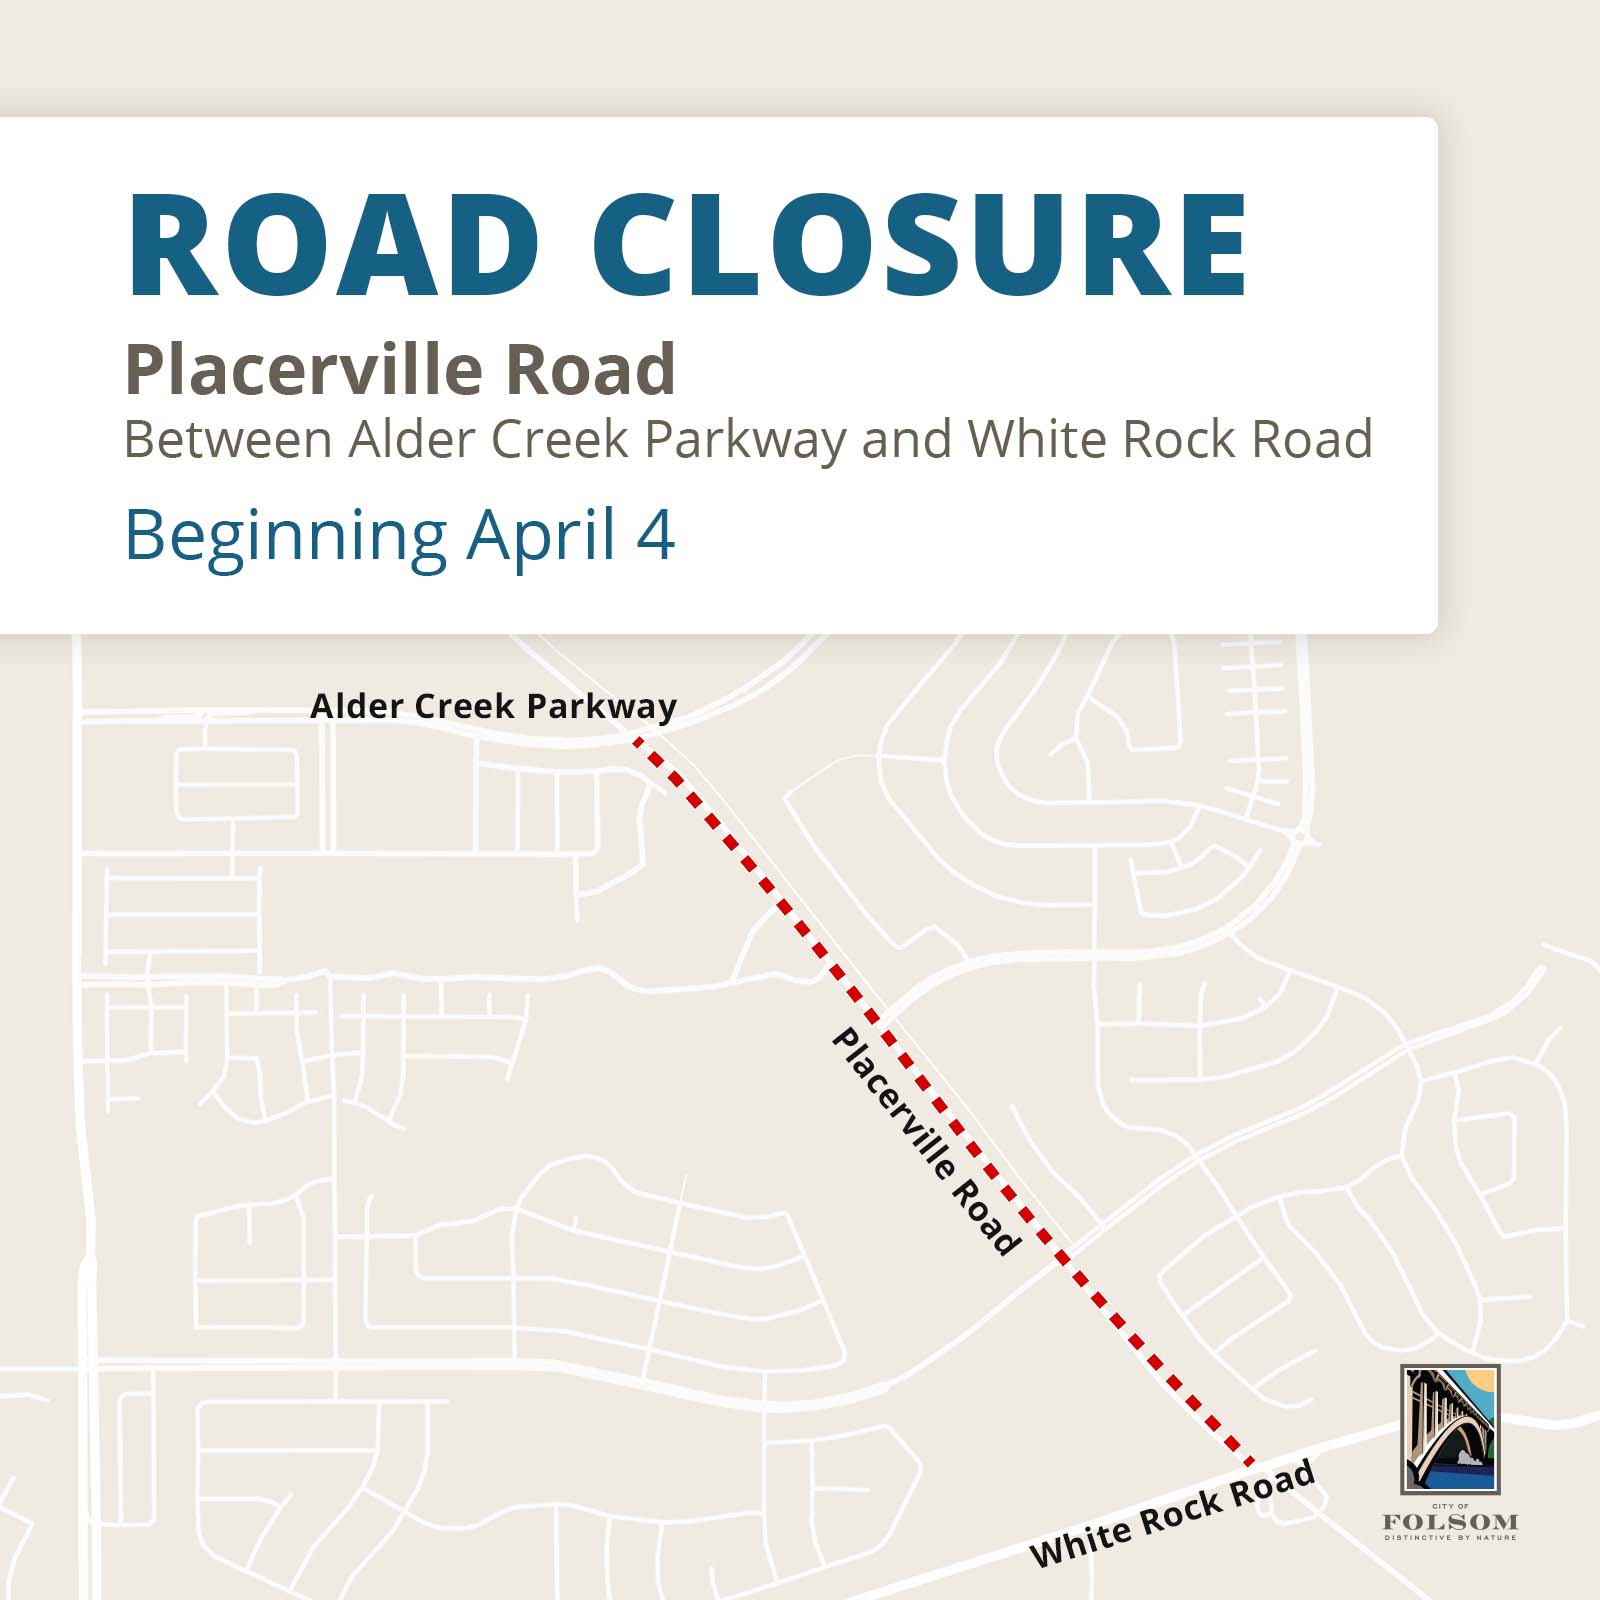 placerville road closure on april 4  with a beige map and a red dotted lineshowing the closure with a colored city of Folsom Logo in the bottom right corner